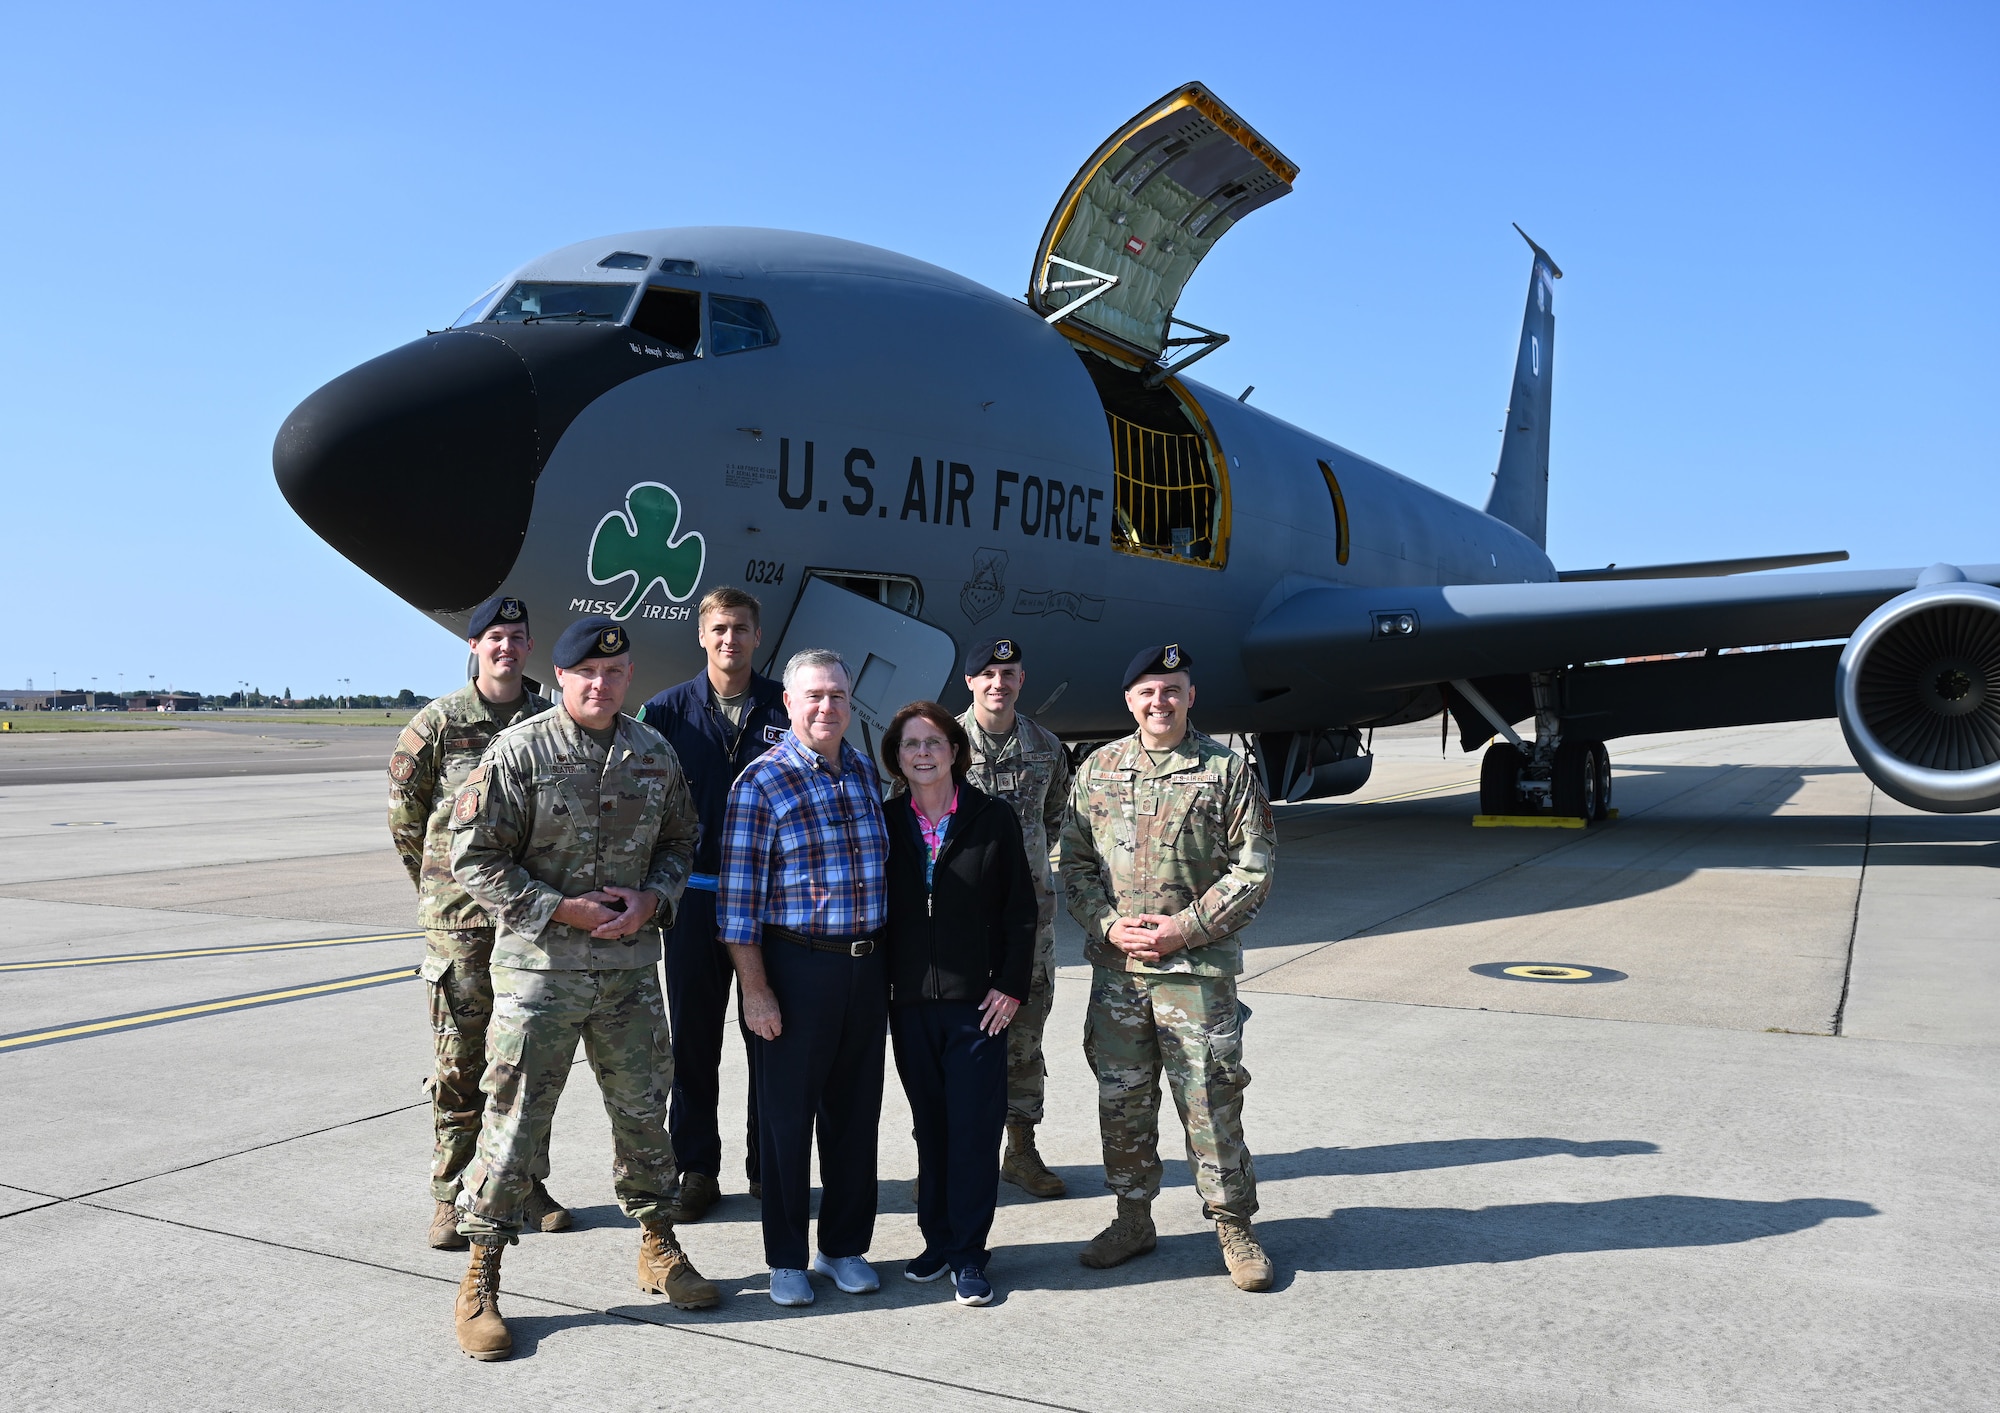 Retired U.S. Navy Capt. Doug Ettus, center, and wife Patti, join leadership and Airmen assigned to the 100th Security Forces Squadron in front of a KC-135 Stratotanker bearing the heritage “Miss Irish” nose art at Royal Air Force Mildenhall, England, Sept. 15, 2023. Ettus’s father, U.S. Army Air Force Staff Sgt. Myron “Ty” Ettus, was a waist gunner on the original Miss Irish – a B-17 Flying Fortress – during World War II. Ty flew out of Thorpe Abbotts, Diss, England, and Doug and his wife travelled to the U.K. to visit Thorpe Abbotts and the 100th Air Refueling Wing to learn more about his father’s time stationed in England. (U.S. Air Force photo by Karen Abeyasekere)